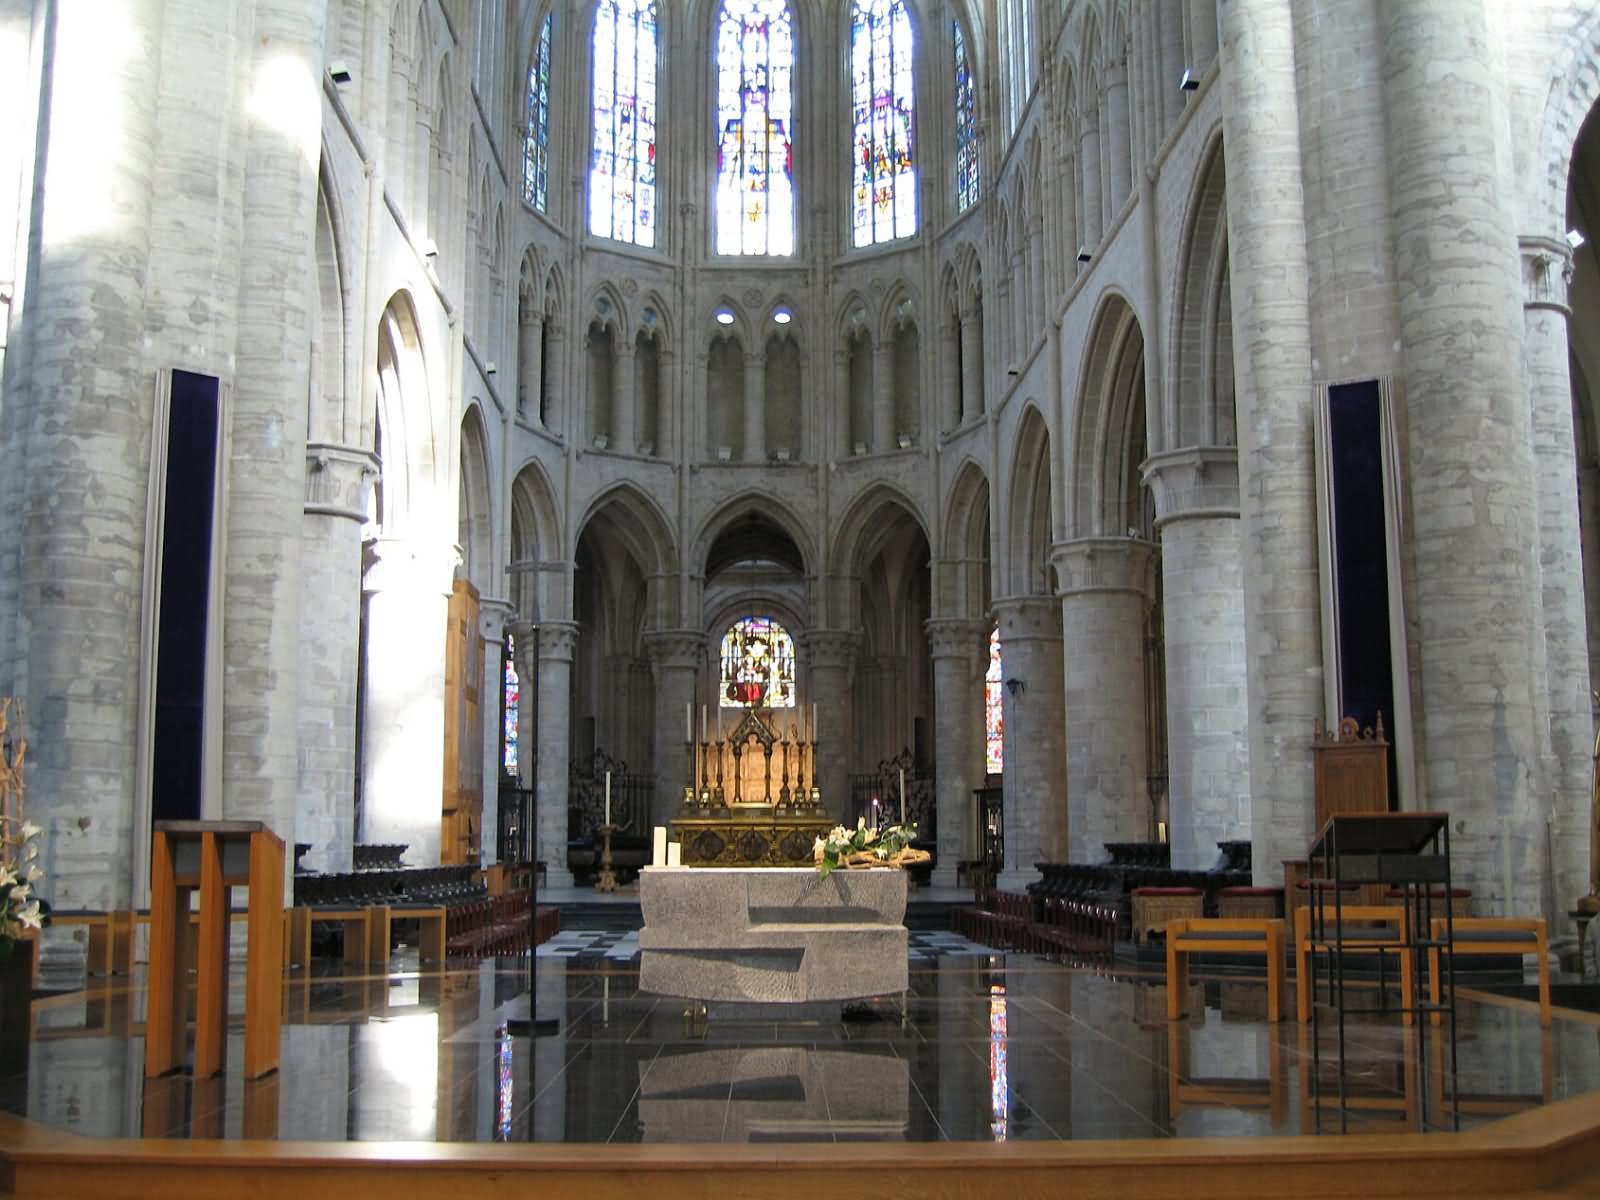 Interior Choir Of The Cathedral of St. Michael and St. Gudula